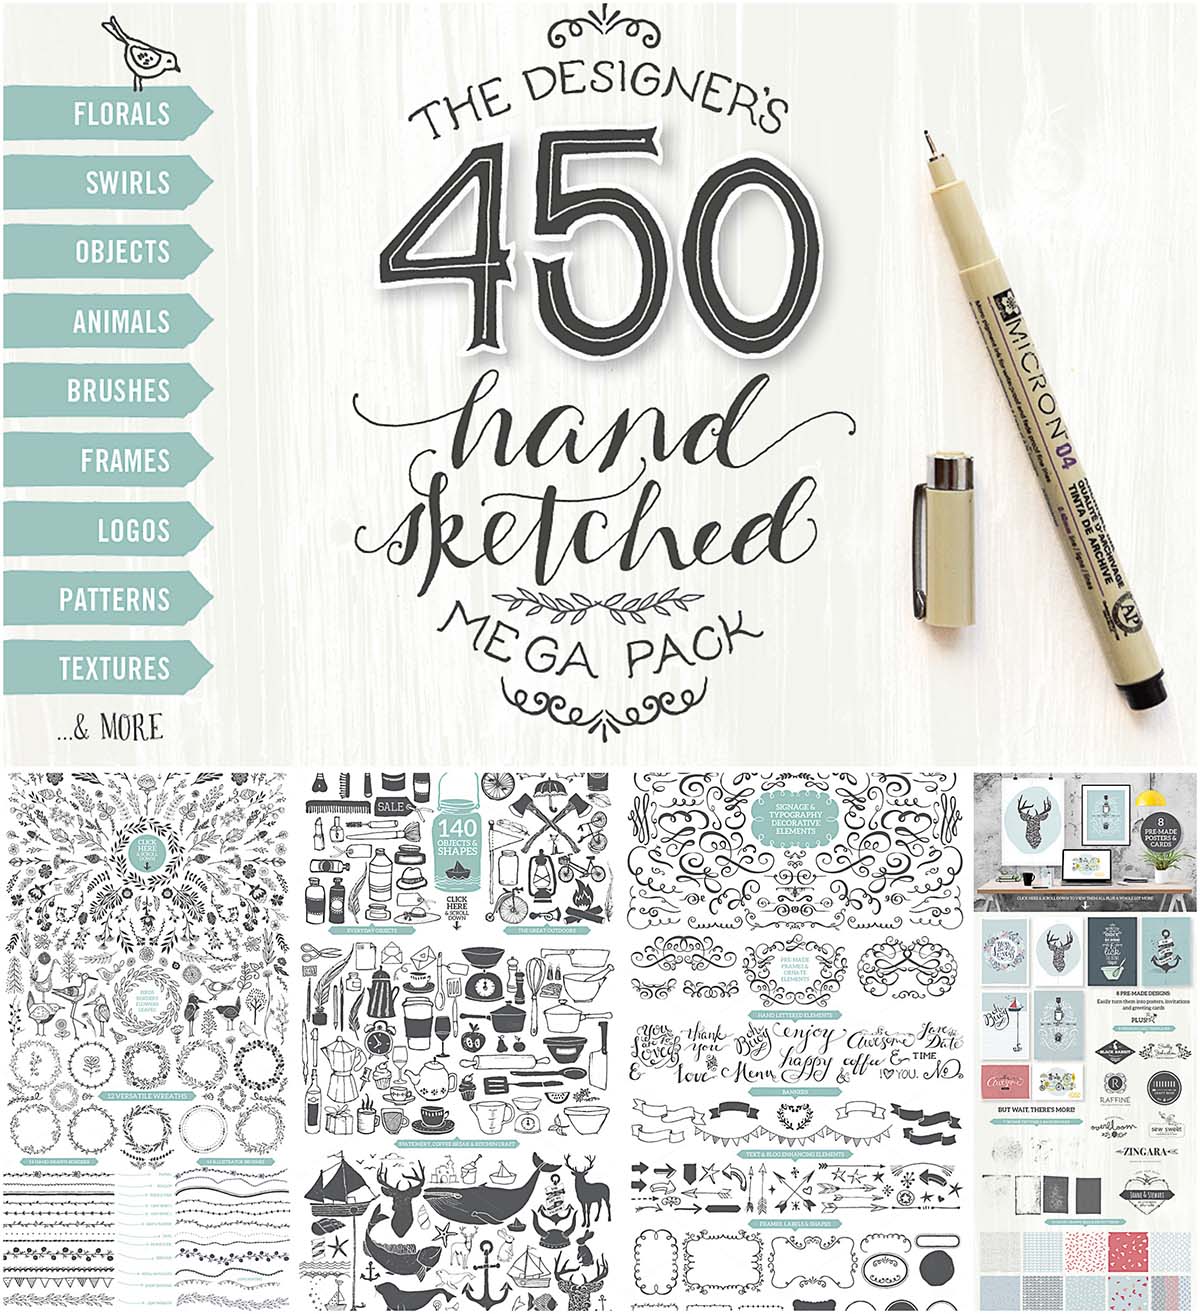 Designers hand scetched vector pack